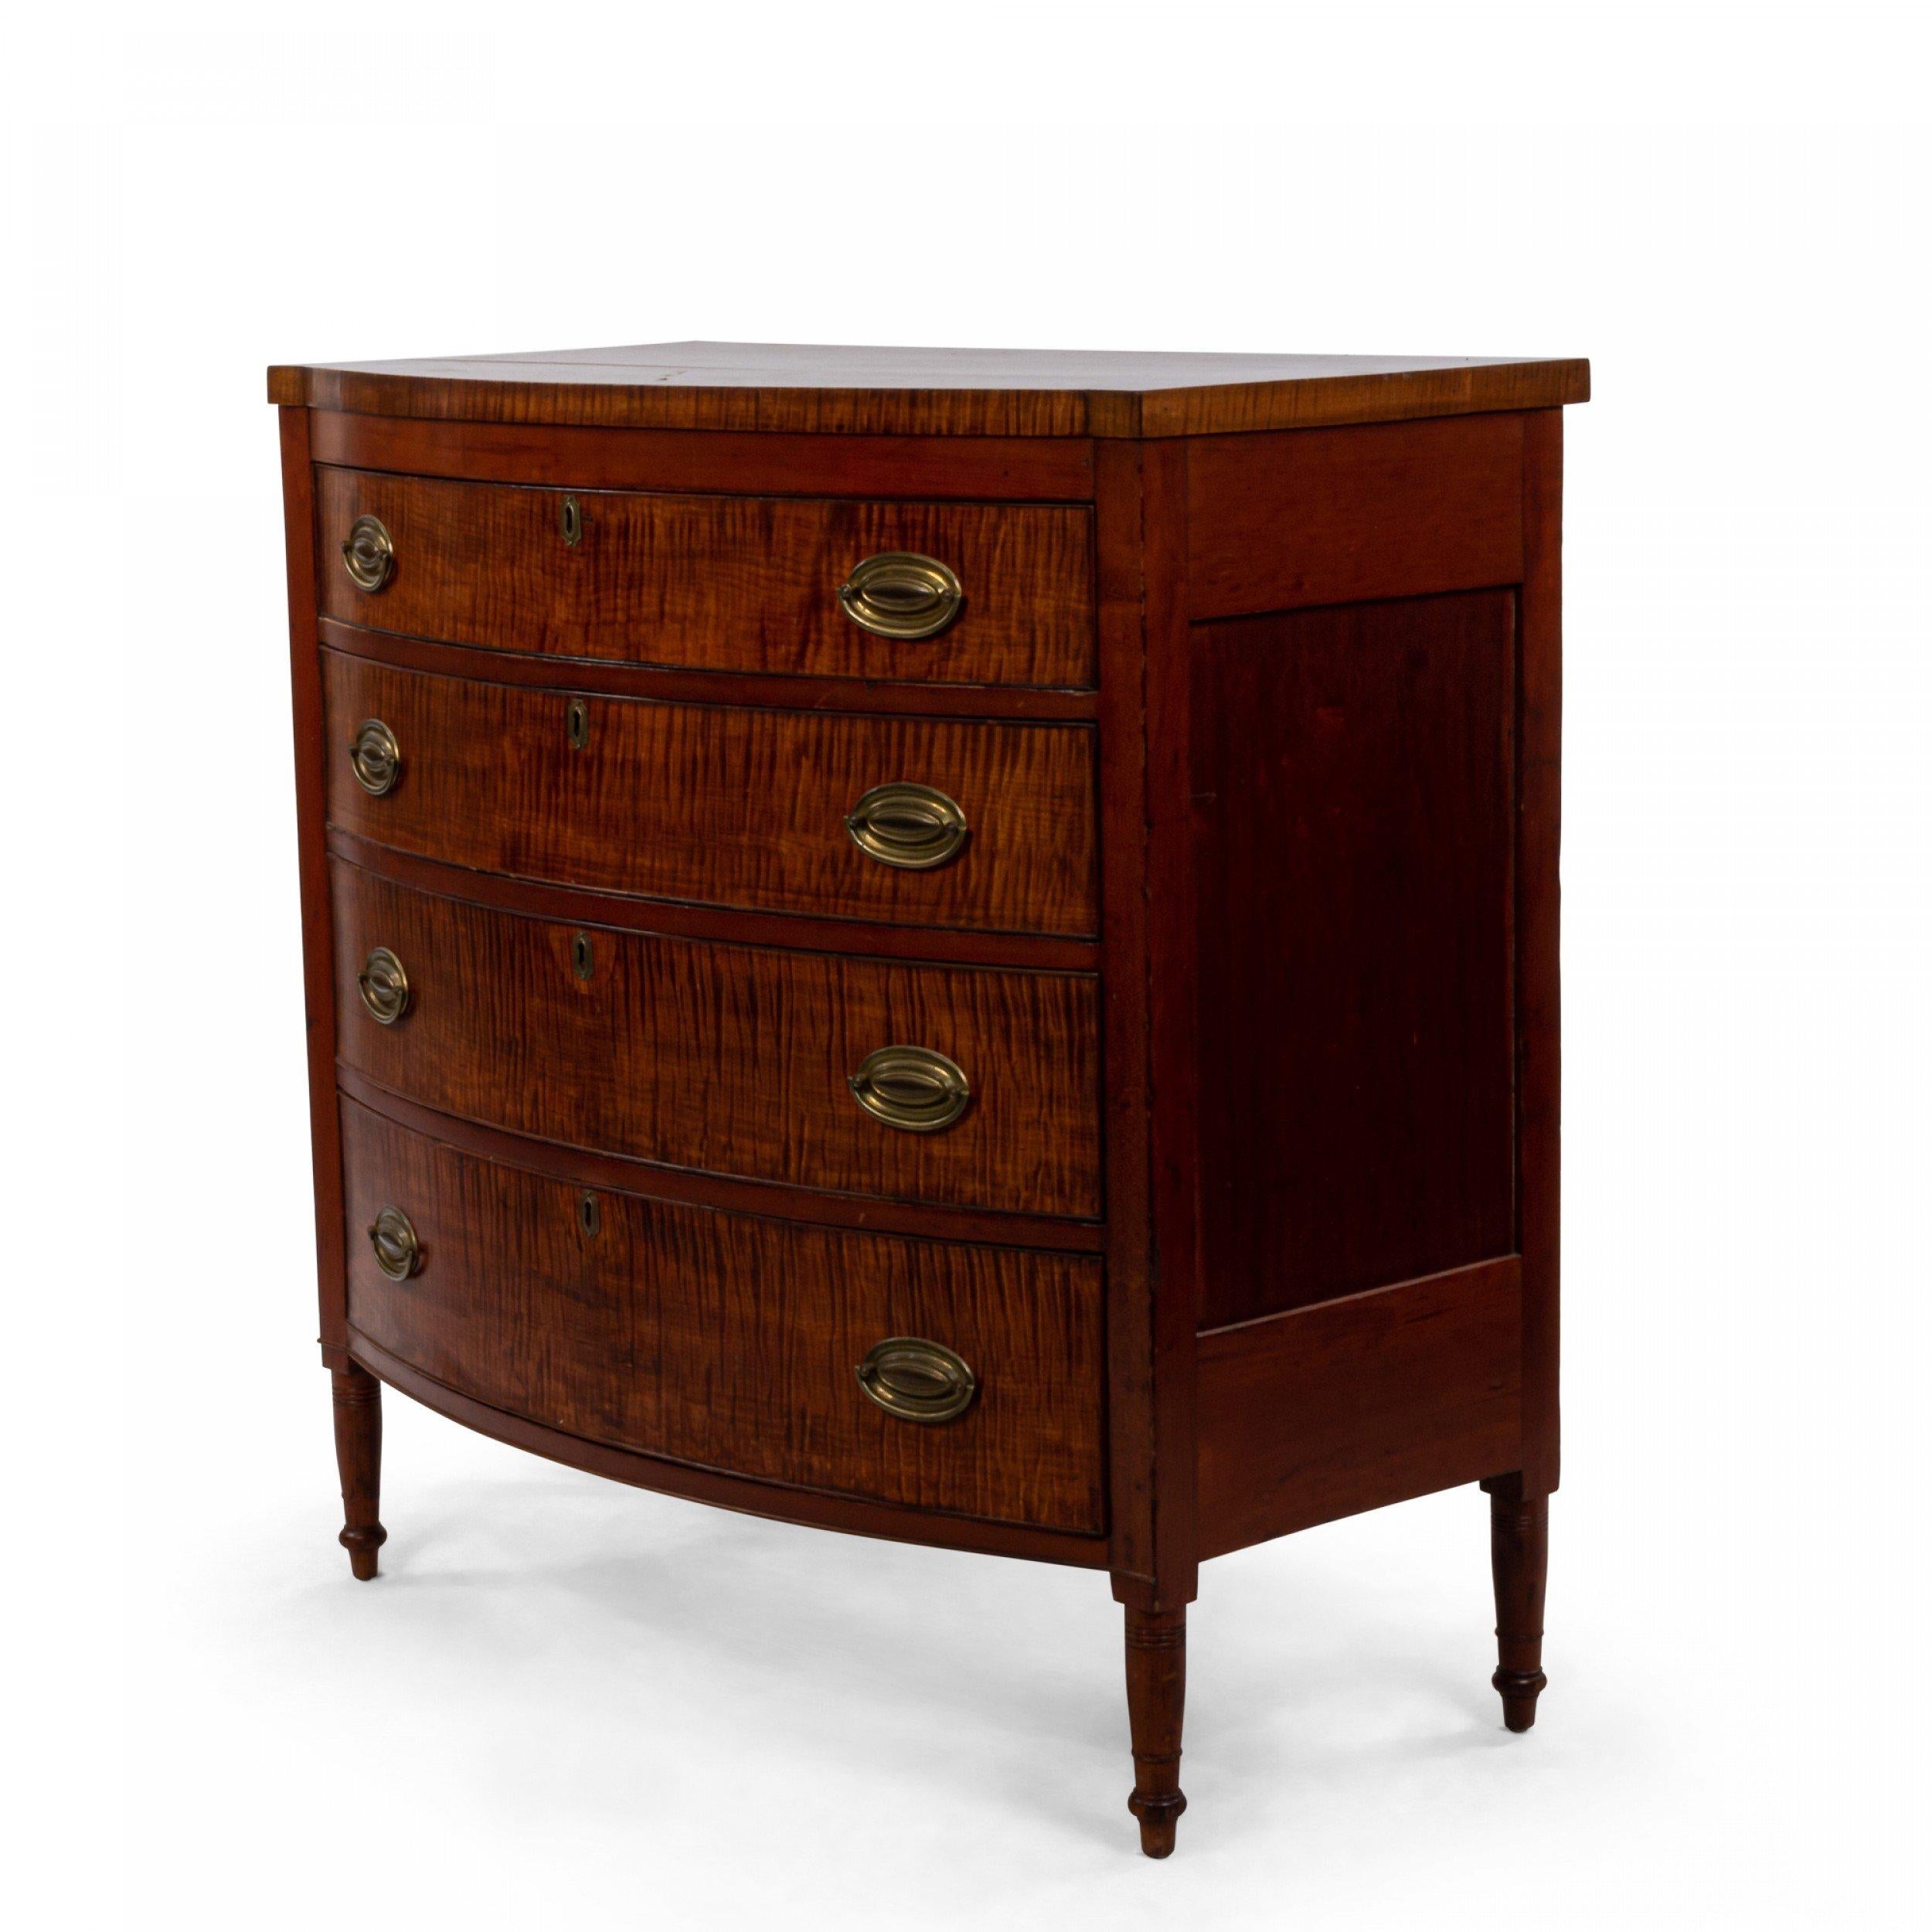 American Federal bowed front tiger maple and mahogany veneer chest of drawers with four drawers with brass hardware and reeded and turn front legs.